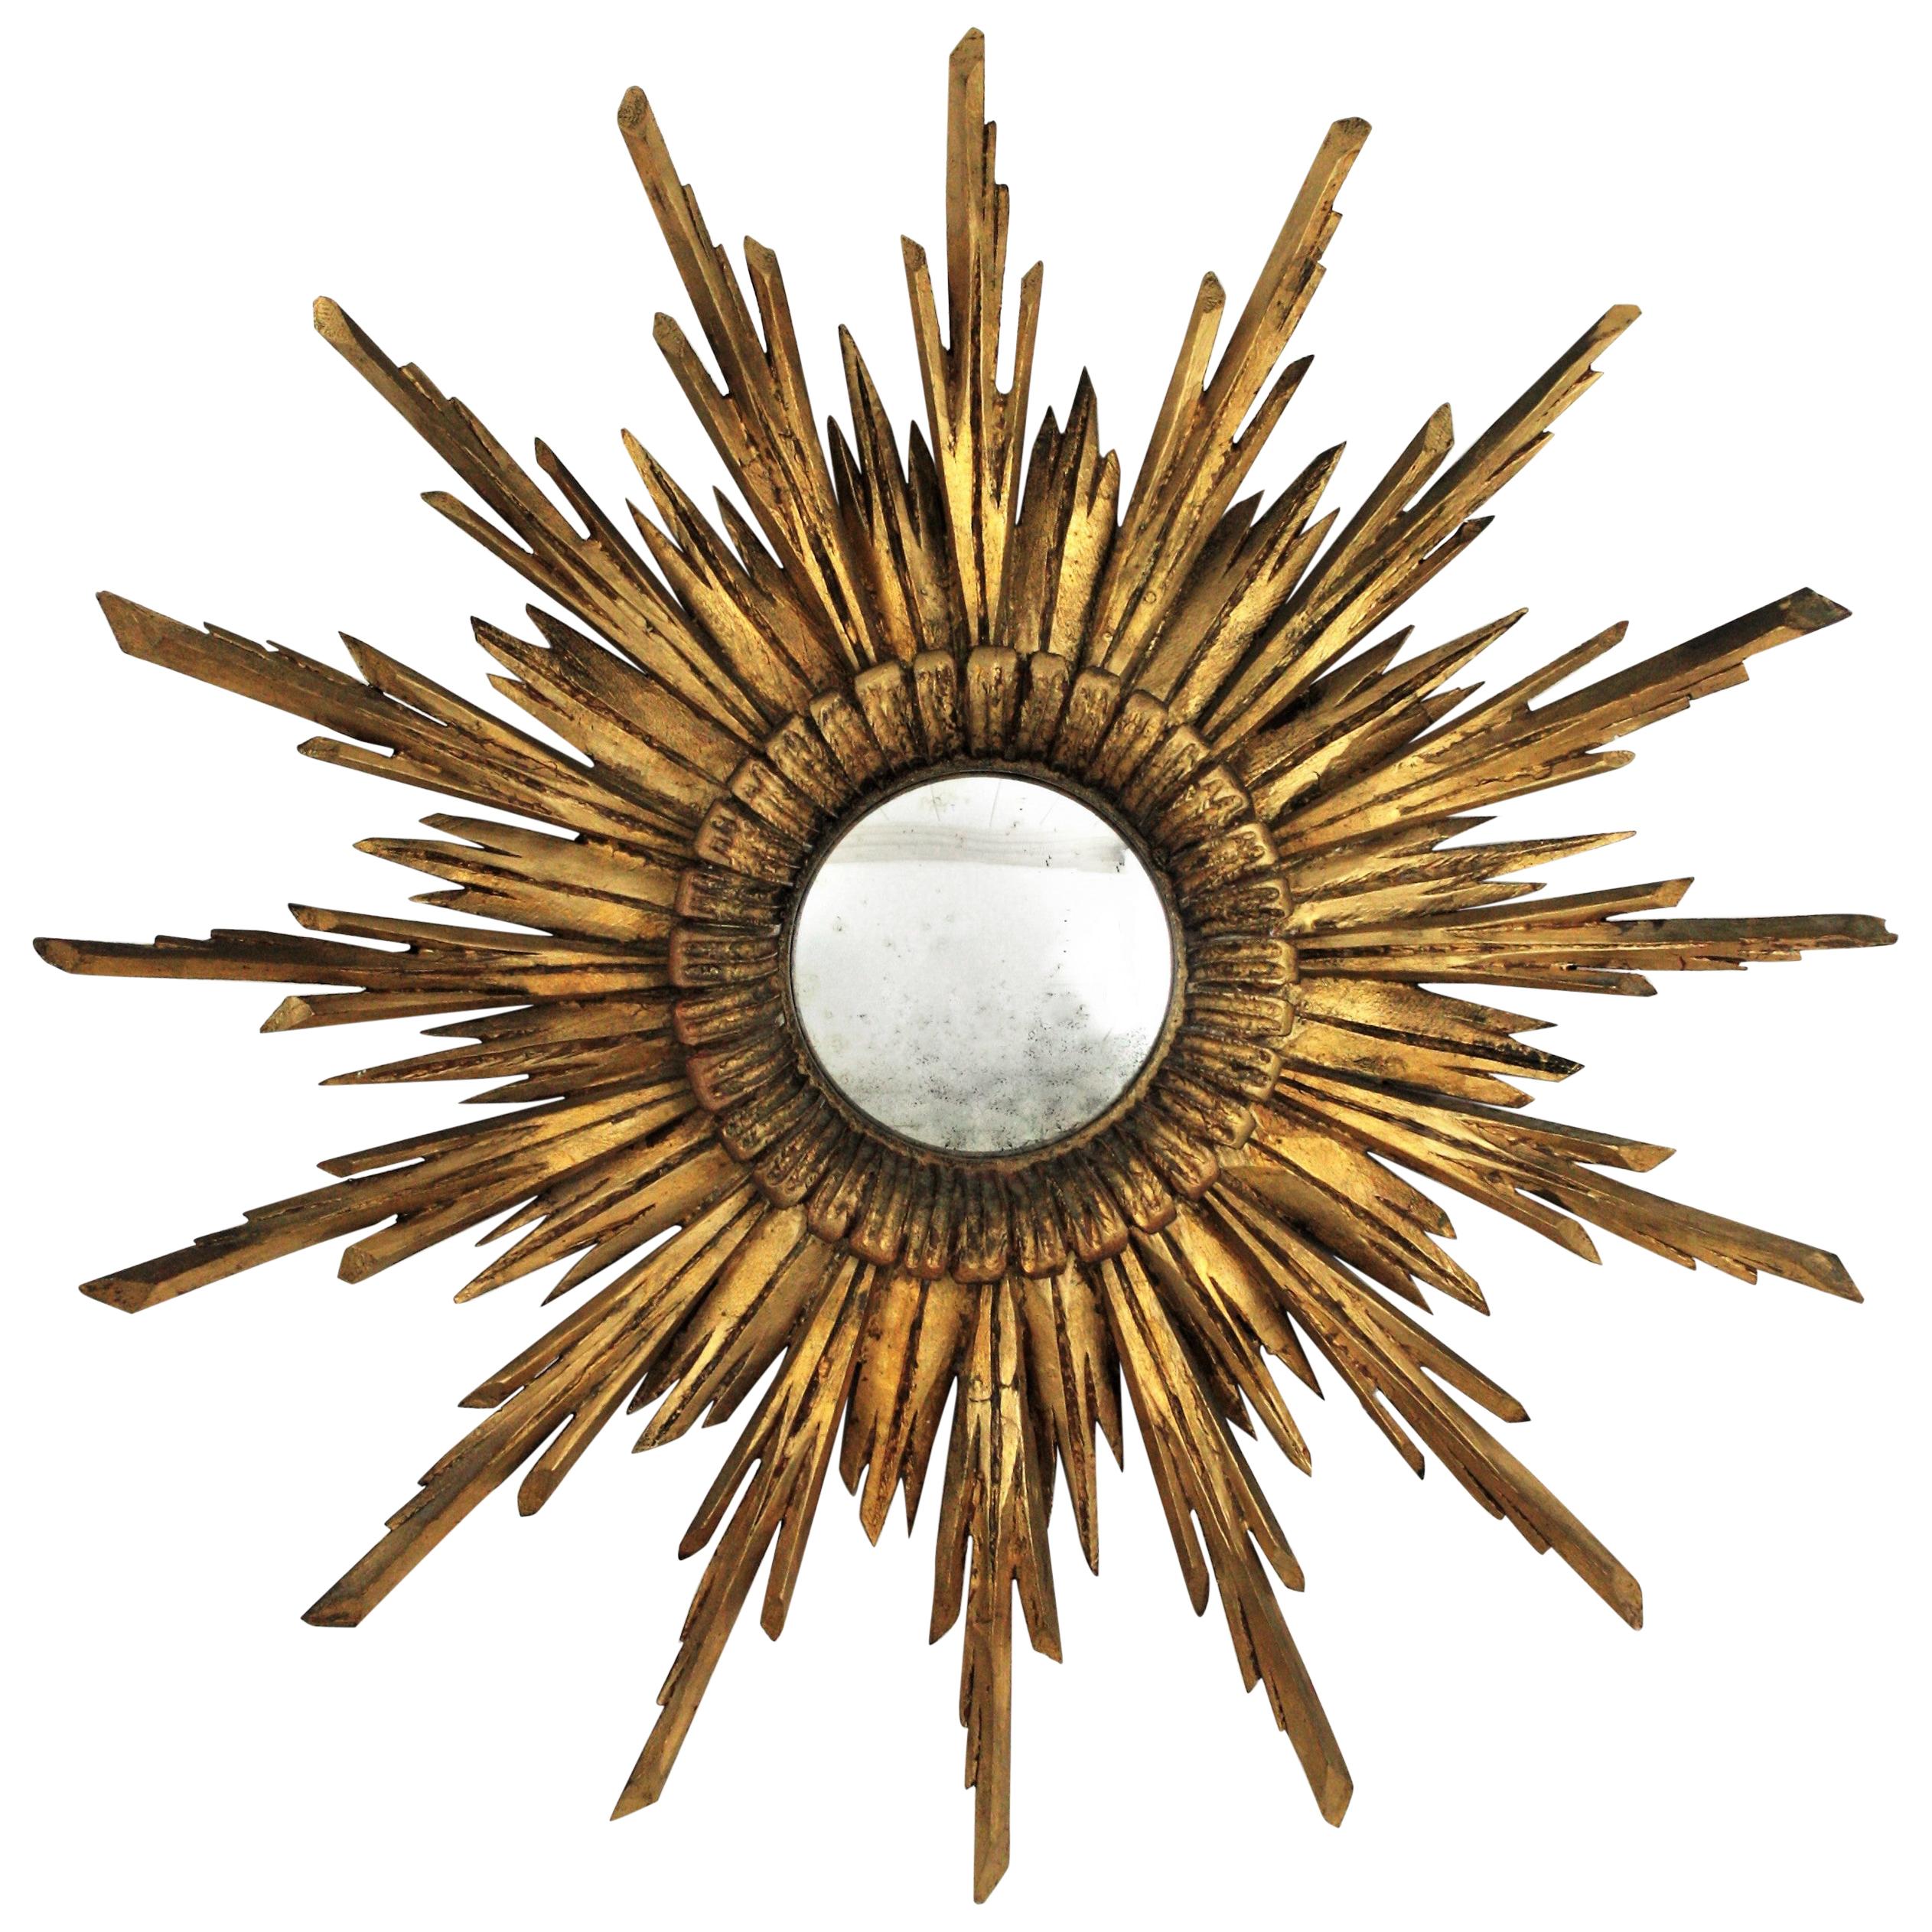 Sunburst Convex Mirror in Carved Giltwood, Baroque Style, 1930s